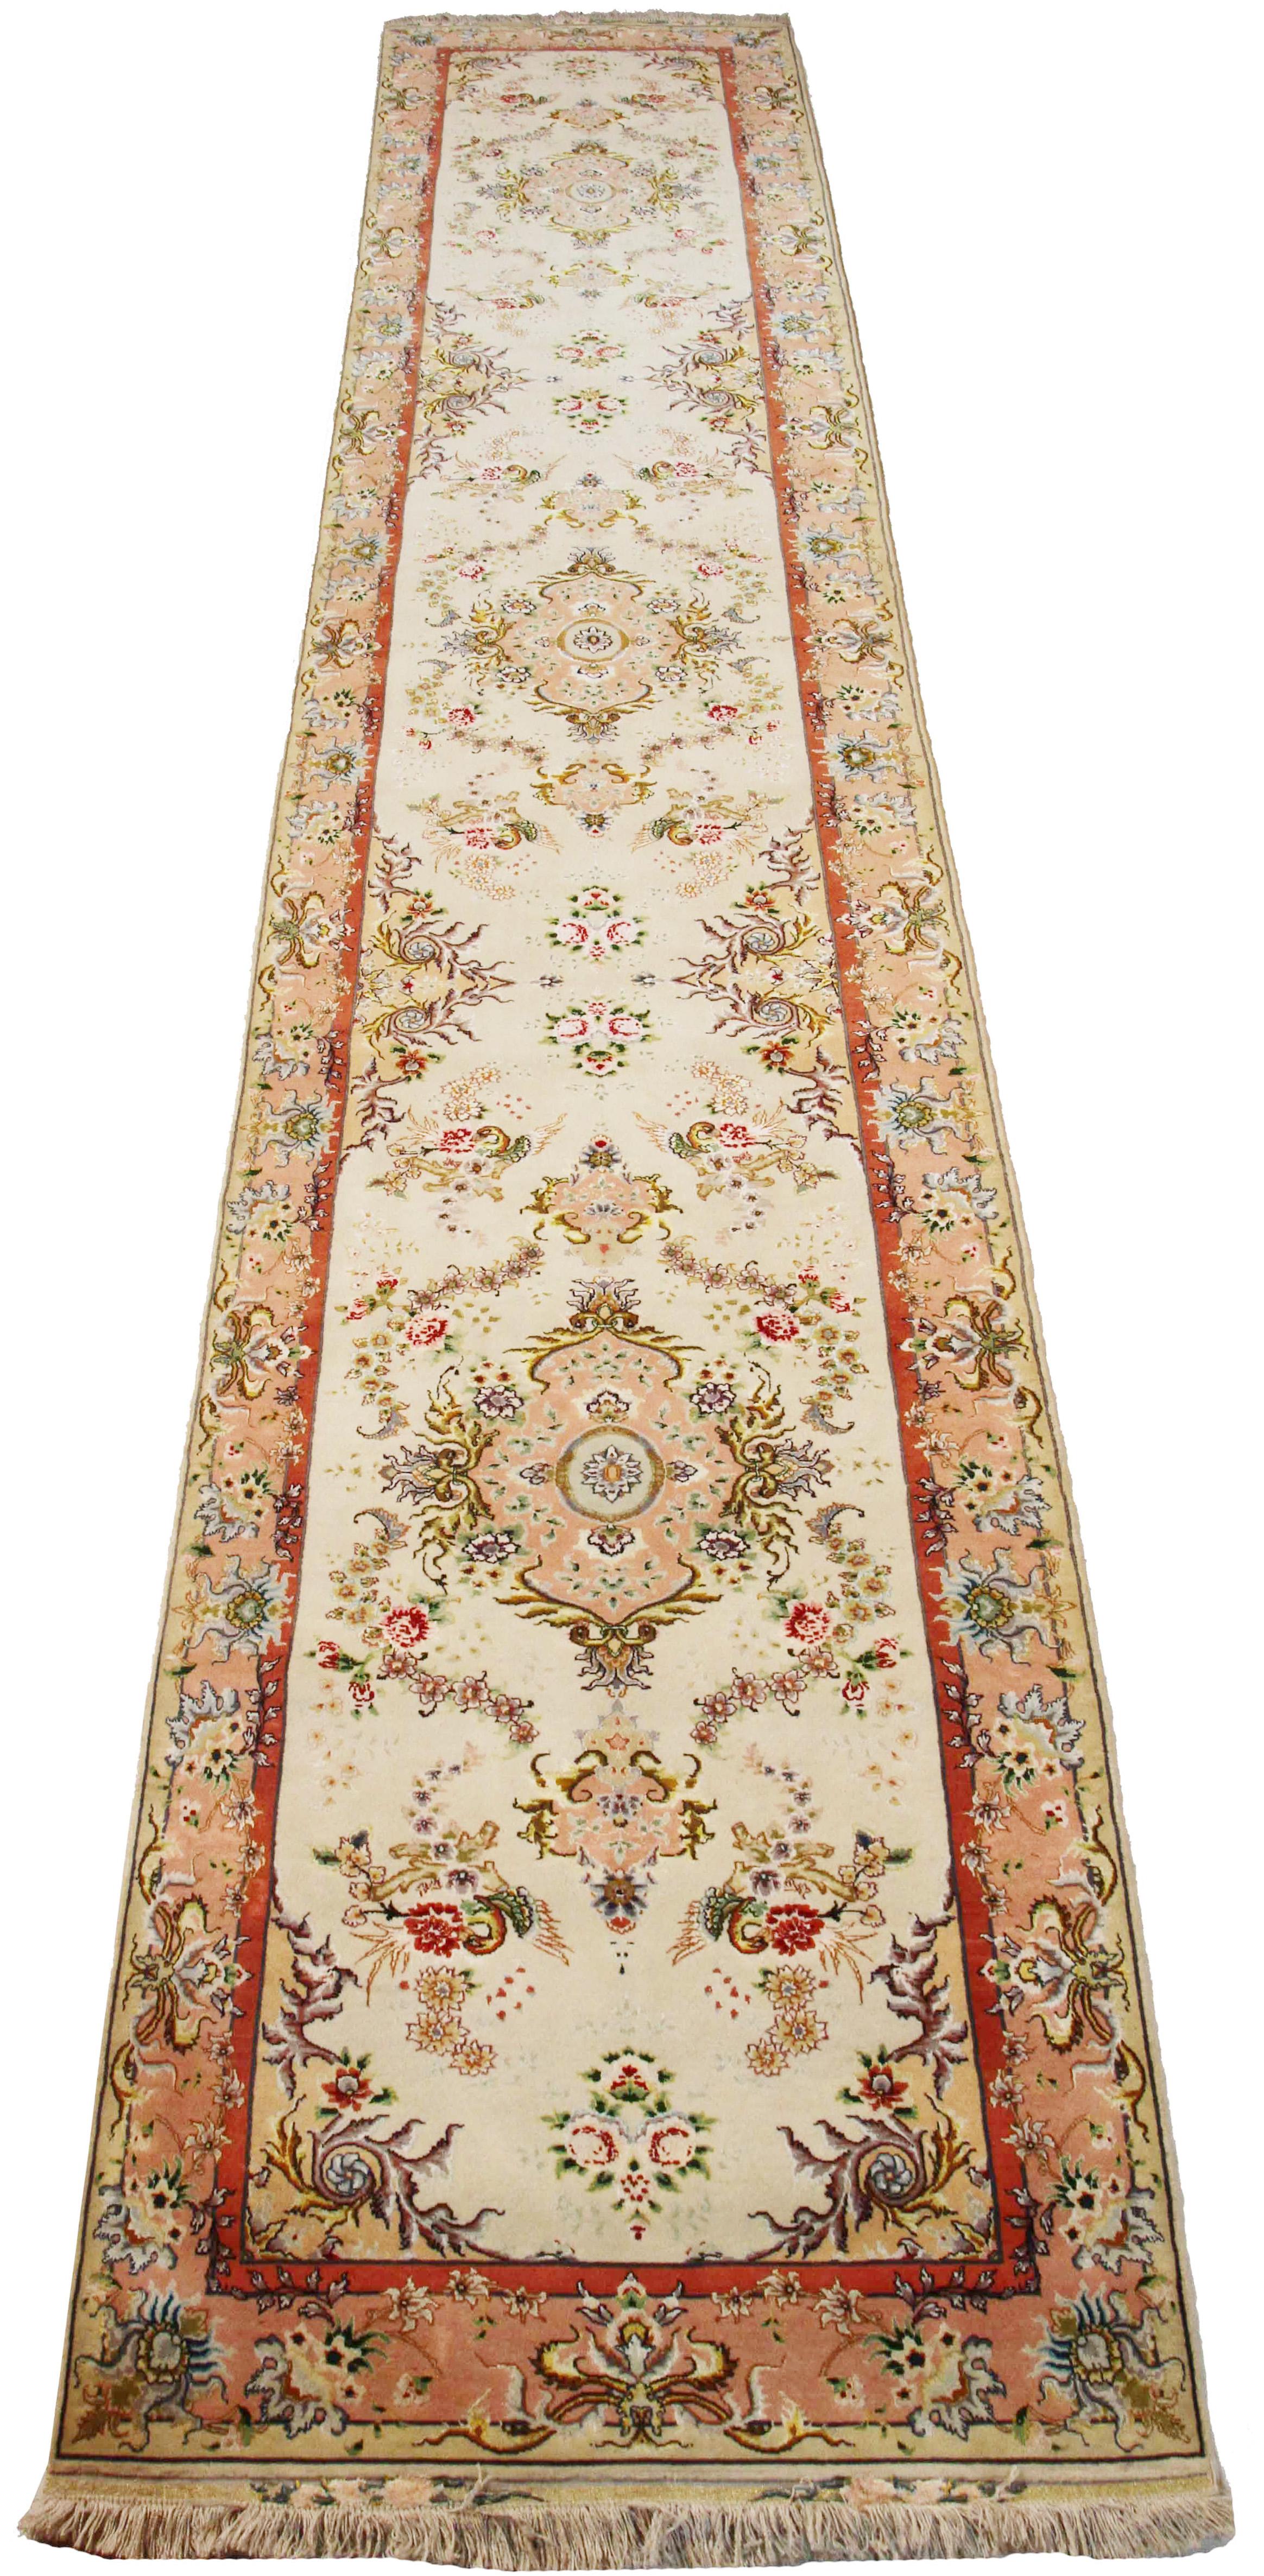 Antique Persian rug handwoven from the finest sheep’s wool and colored with all-natural vegetable dyes that are safe for humans and pets. It’s a traditional Tabriz weaving featuring a lovely ensemble of colorful floral motifs over an ivory field.